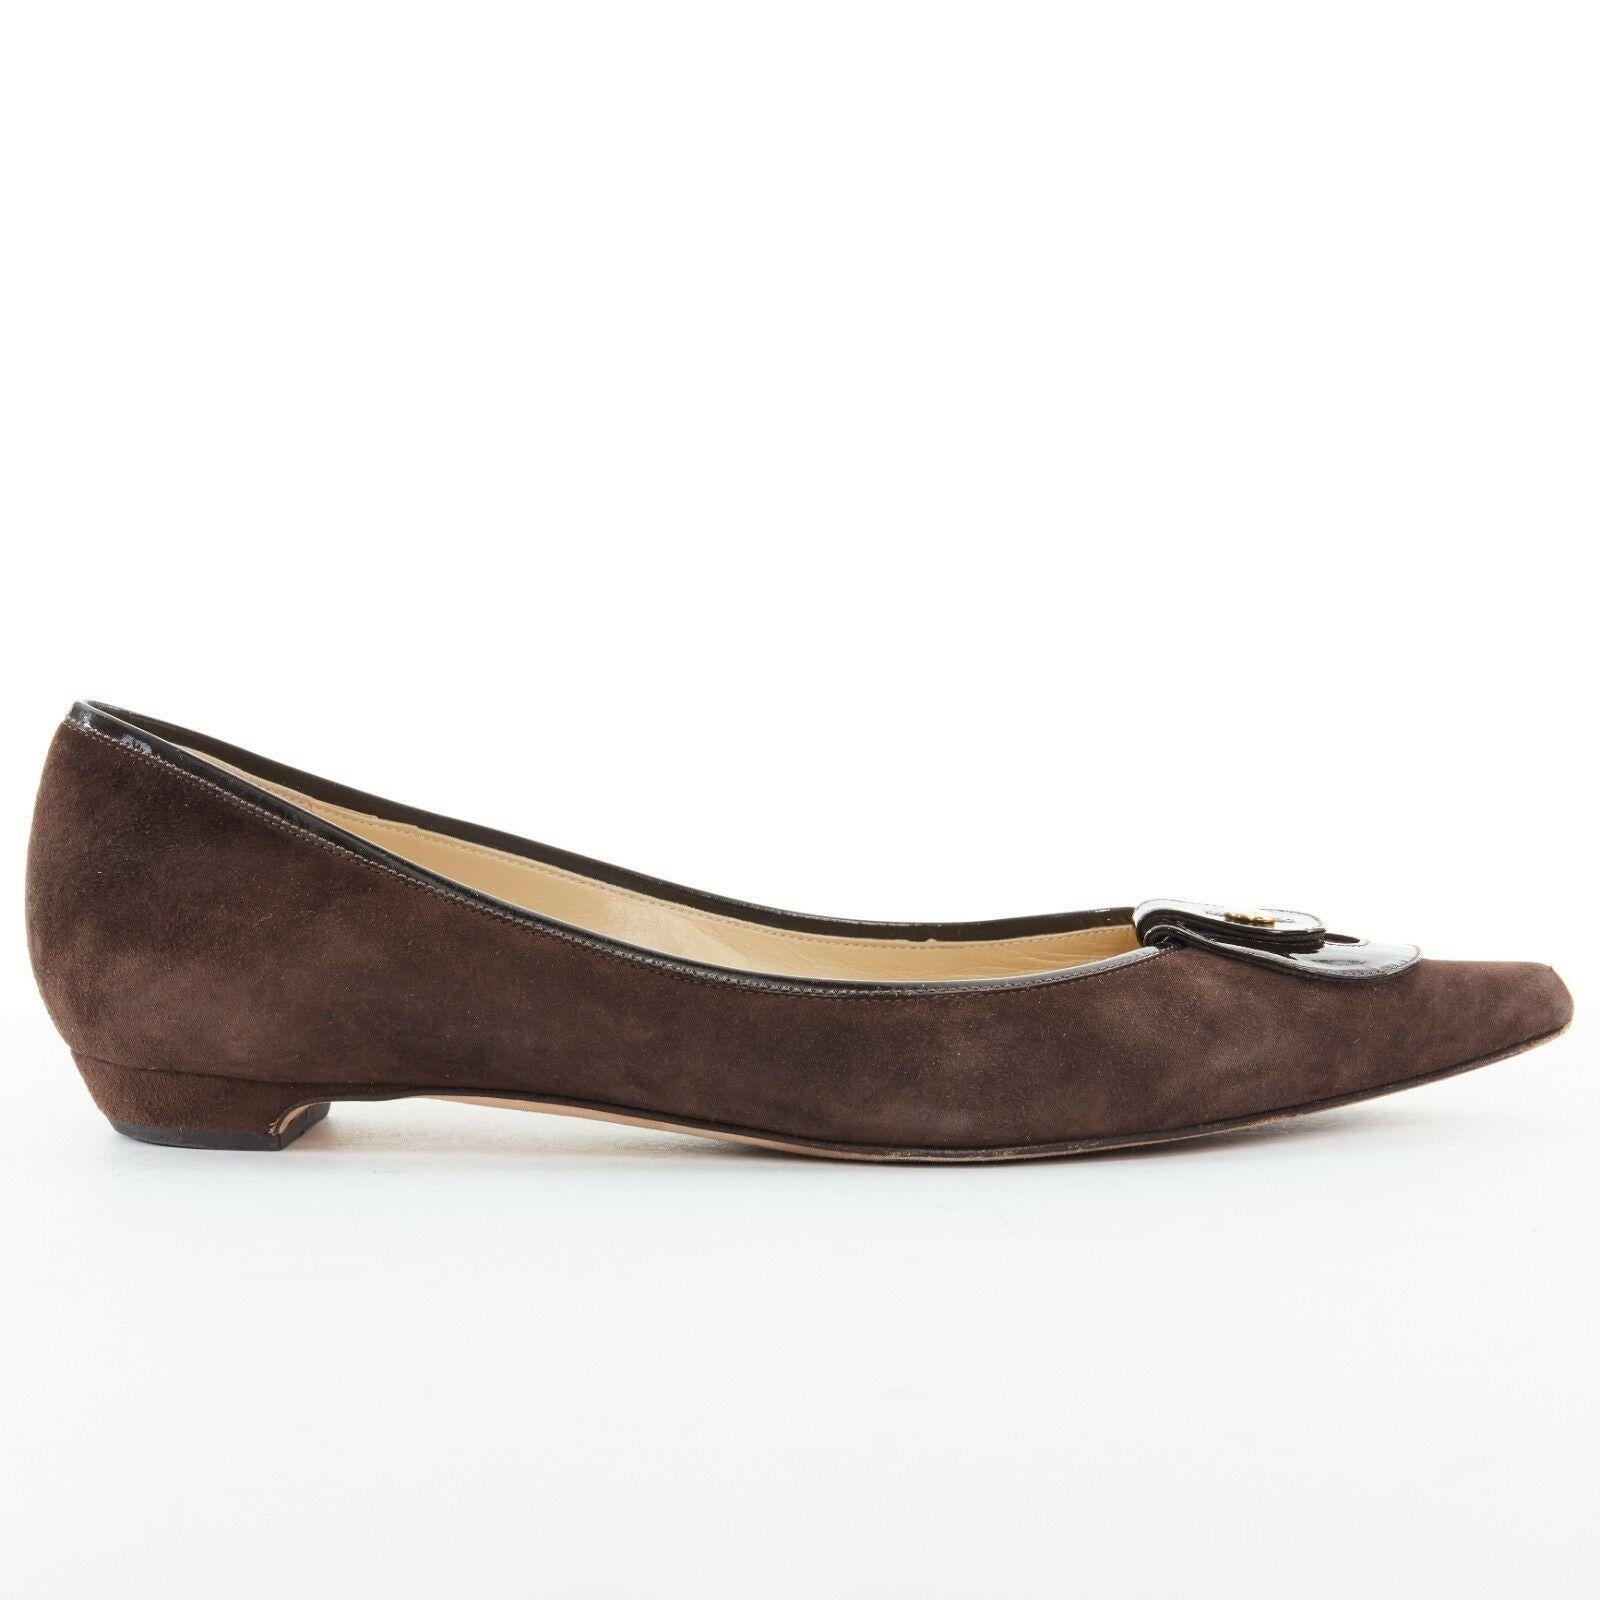 JIMMY CHOO brown suede leather patent detail pointed flat shoes EU37.5 US7.5 
Reference: CC/AECG00169 
Brand: Jimmy Choo 
Designer: Jimmy Choo 
Material: Suede 
Color: Brown 
Pattern: Solid 
Extra Detail: Brown suede leather upper. Brown patent